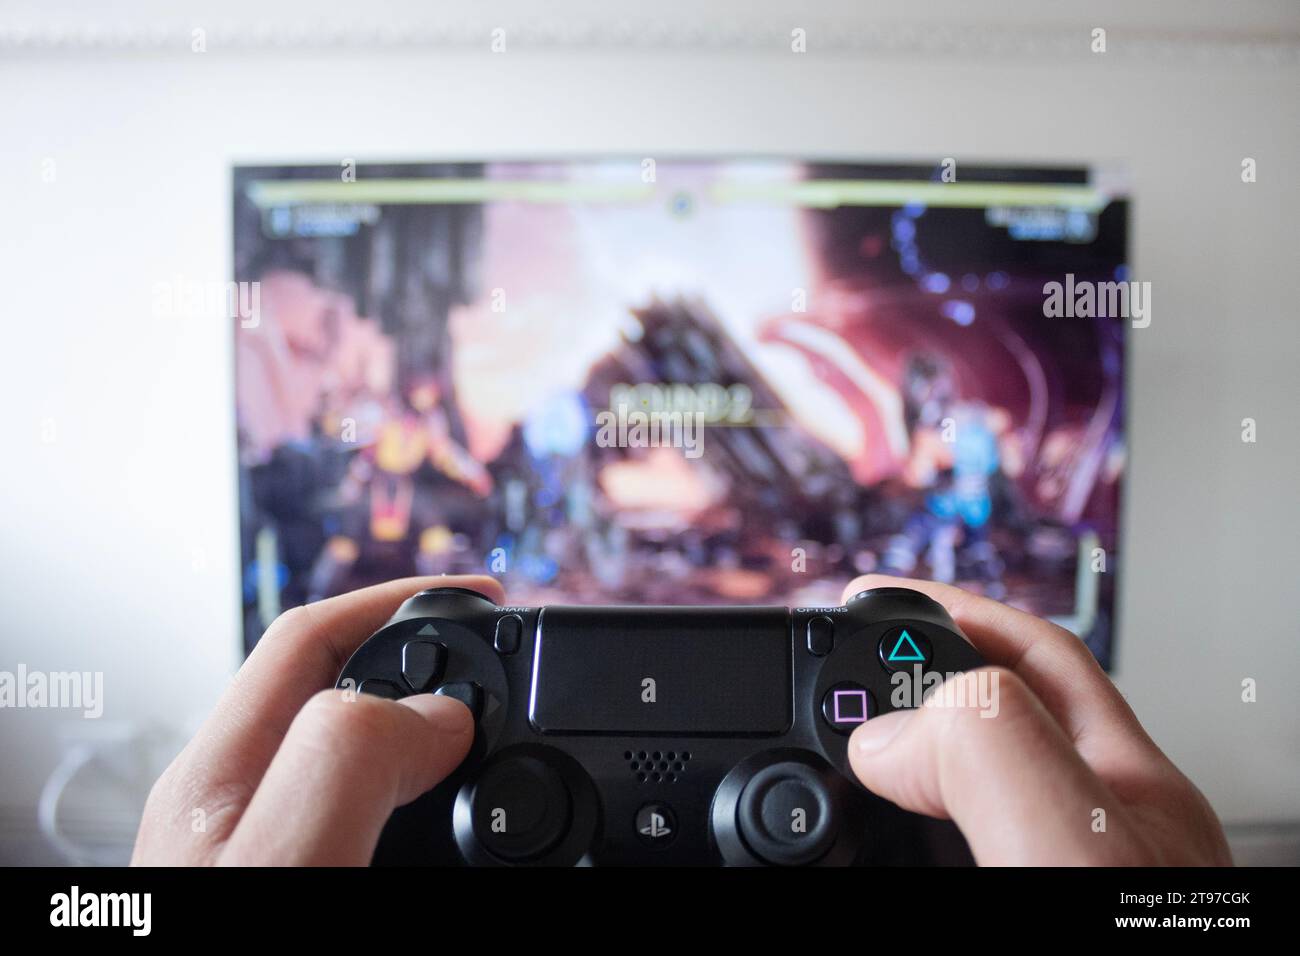 A male hand holding a play station 4 controller with fighter video game in a smart tv at background Stock Photo